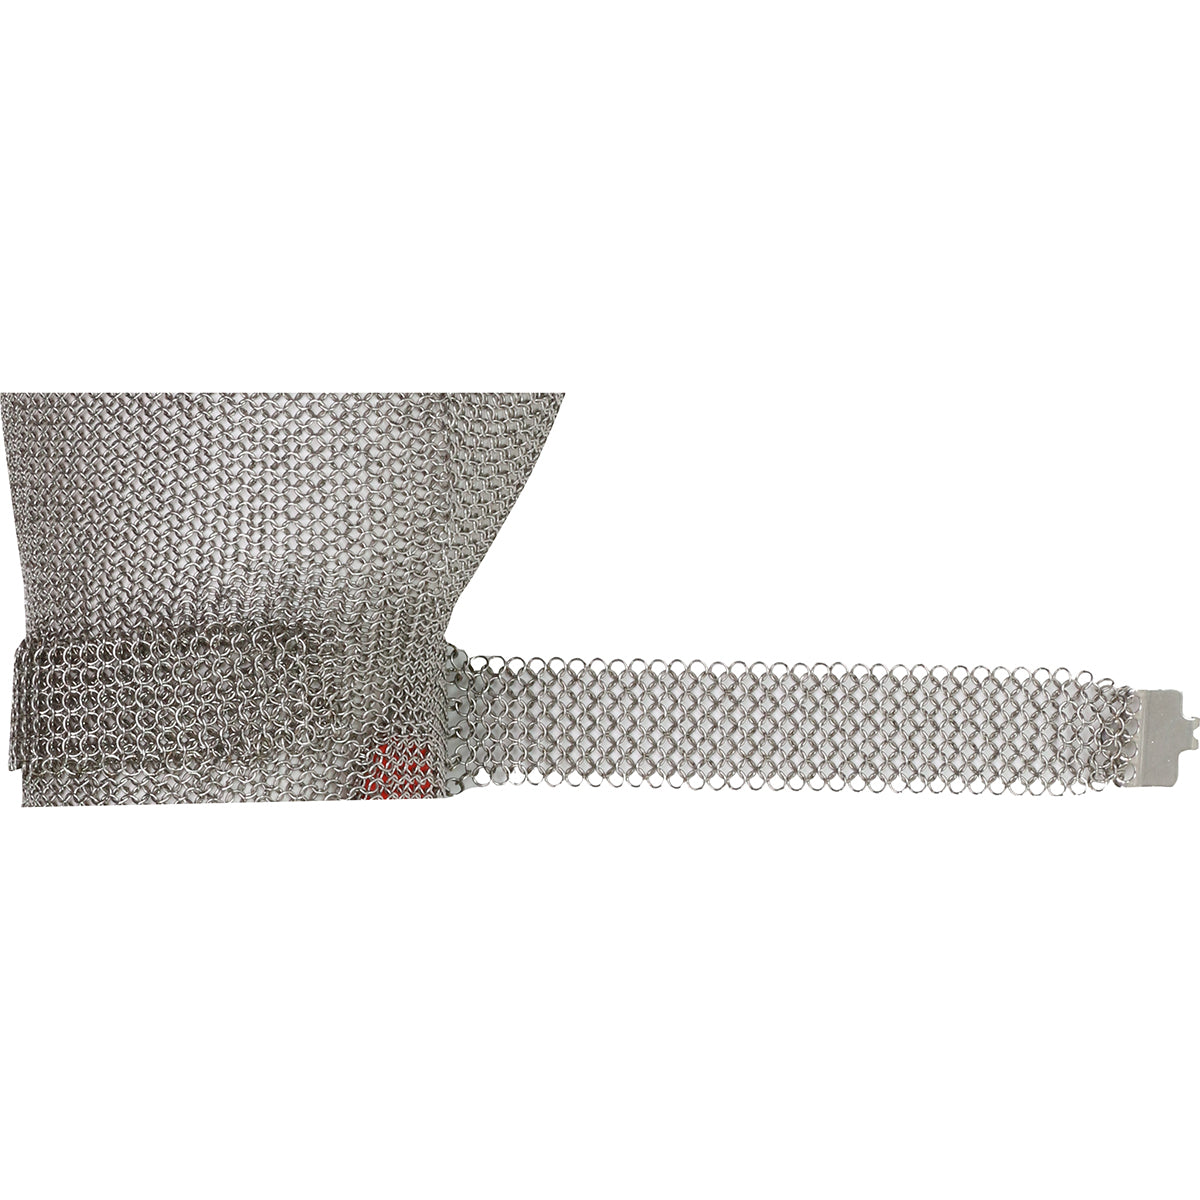 US Mesh USM-1547-XS Stainless Steel Mesh Glove with Spring Closure - Forearm Length